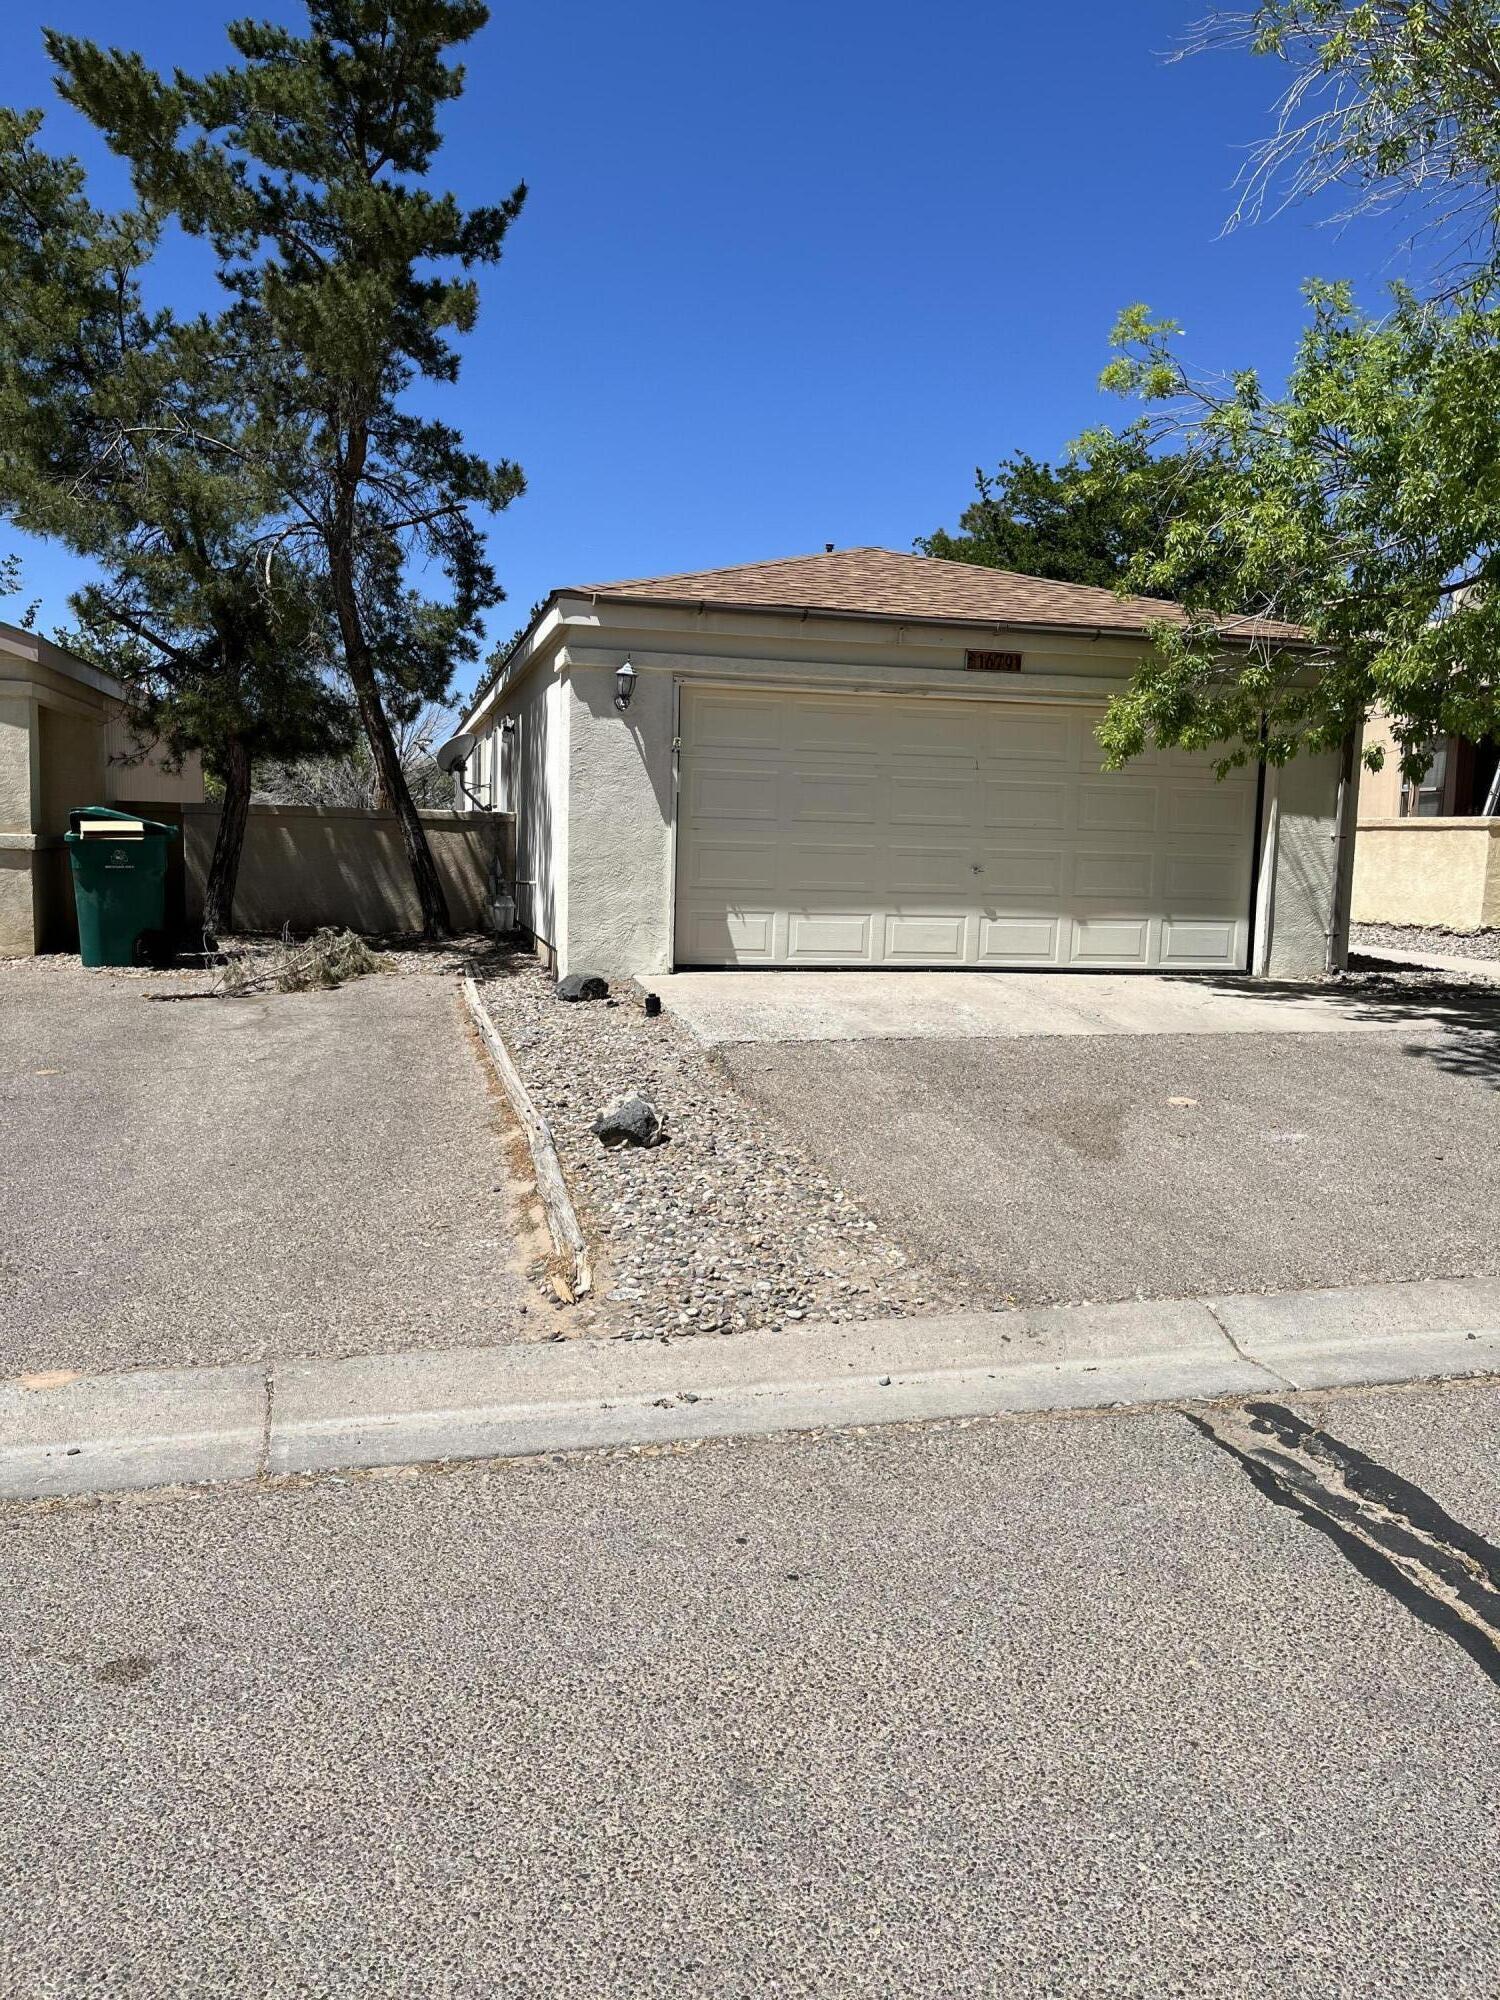 Beautiful charming 3 bedroom,  2 bathroom home with new paint, new carpet, new low flow toilets, new ceiling fans in all rooms, new roof, nice sun room,  refrigerated air, central forced heating, storage shed in the backyard and much more to offer.